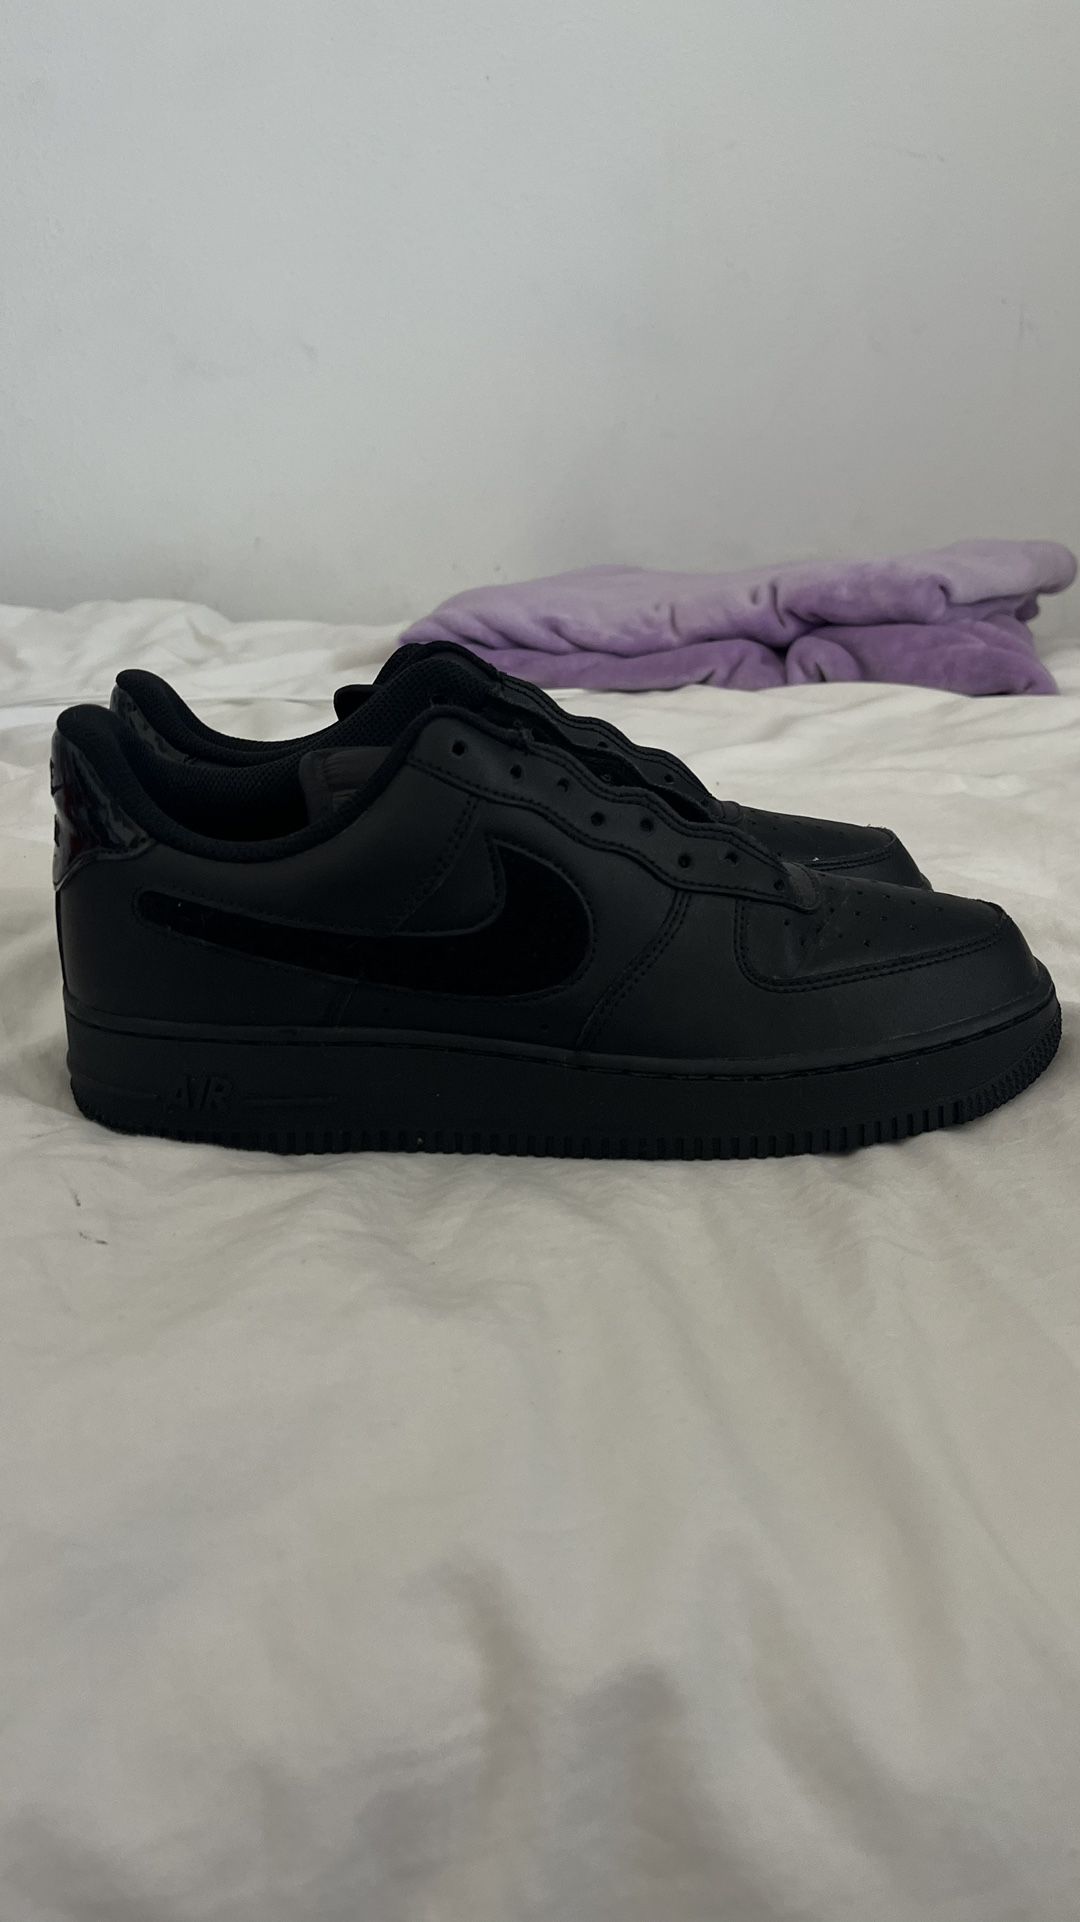 Black Nike Air Forces Velcro for Sale in Ruskin, FL - OfferUp